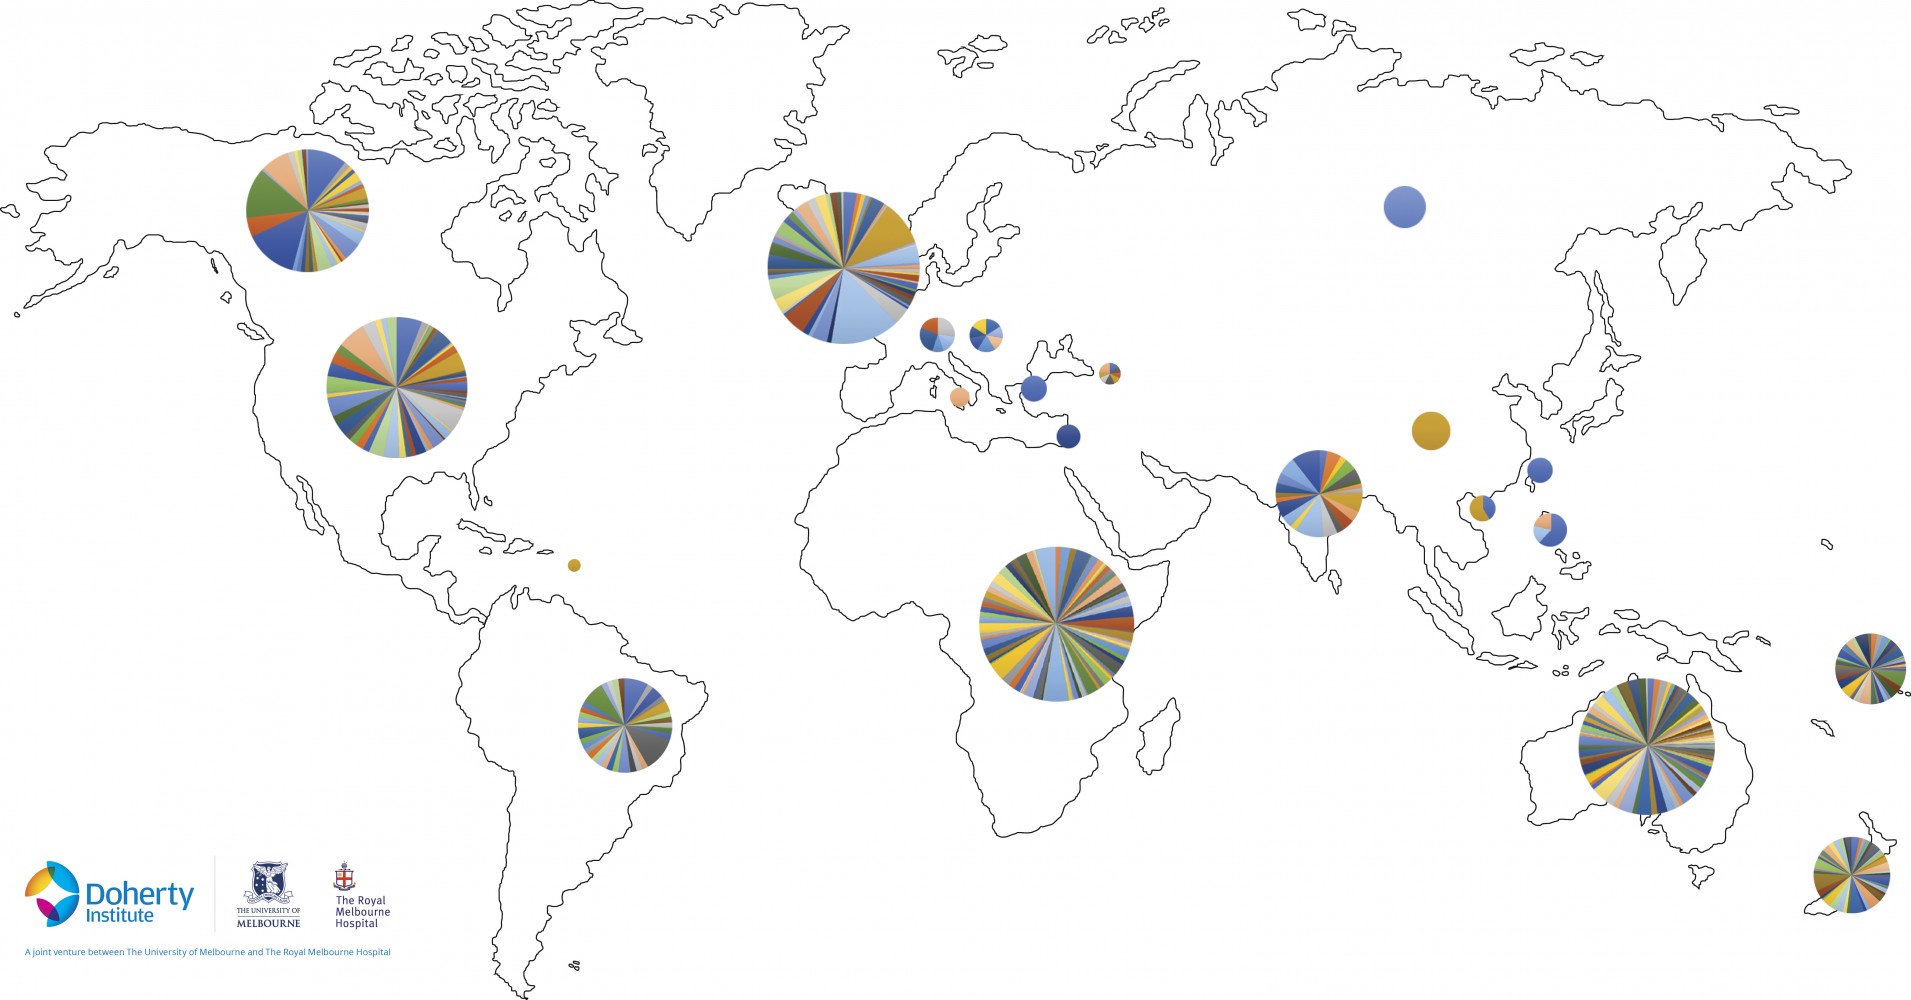 Global distribution of the diverse Strep A strains represented within the global genome database. The size of pie charts represent the number of isolates per region and the colours represent different Strep A serotypes.